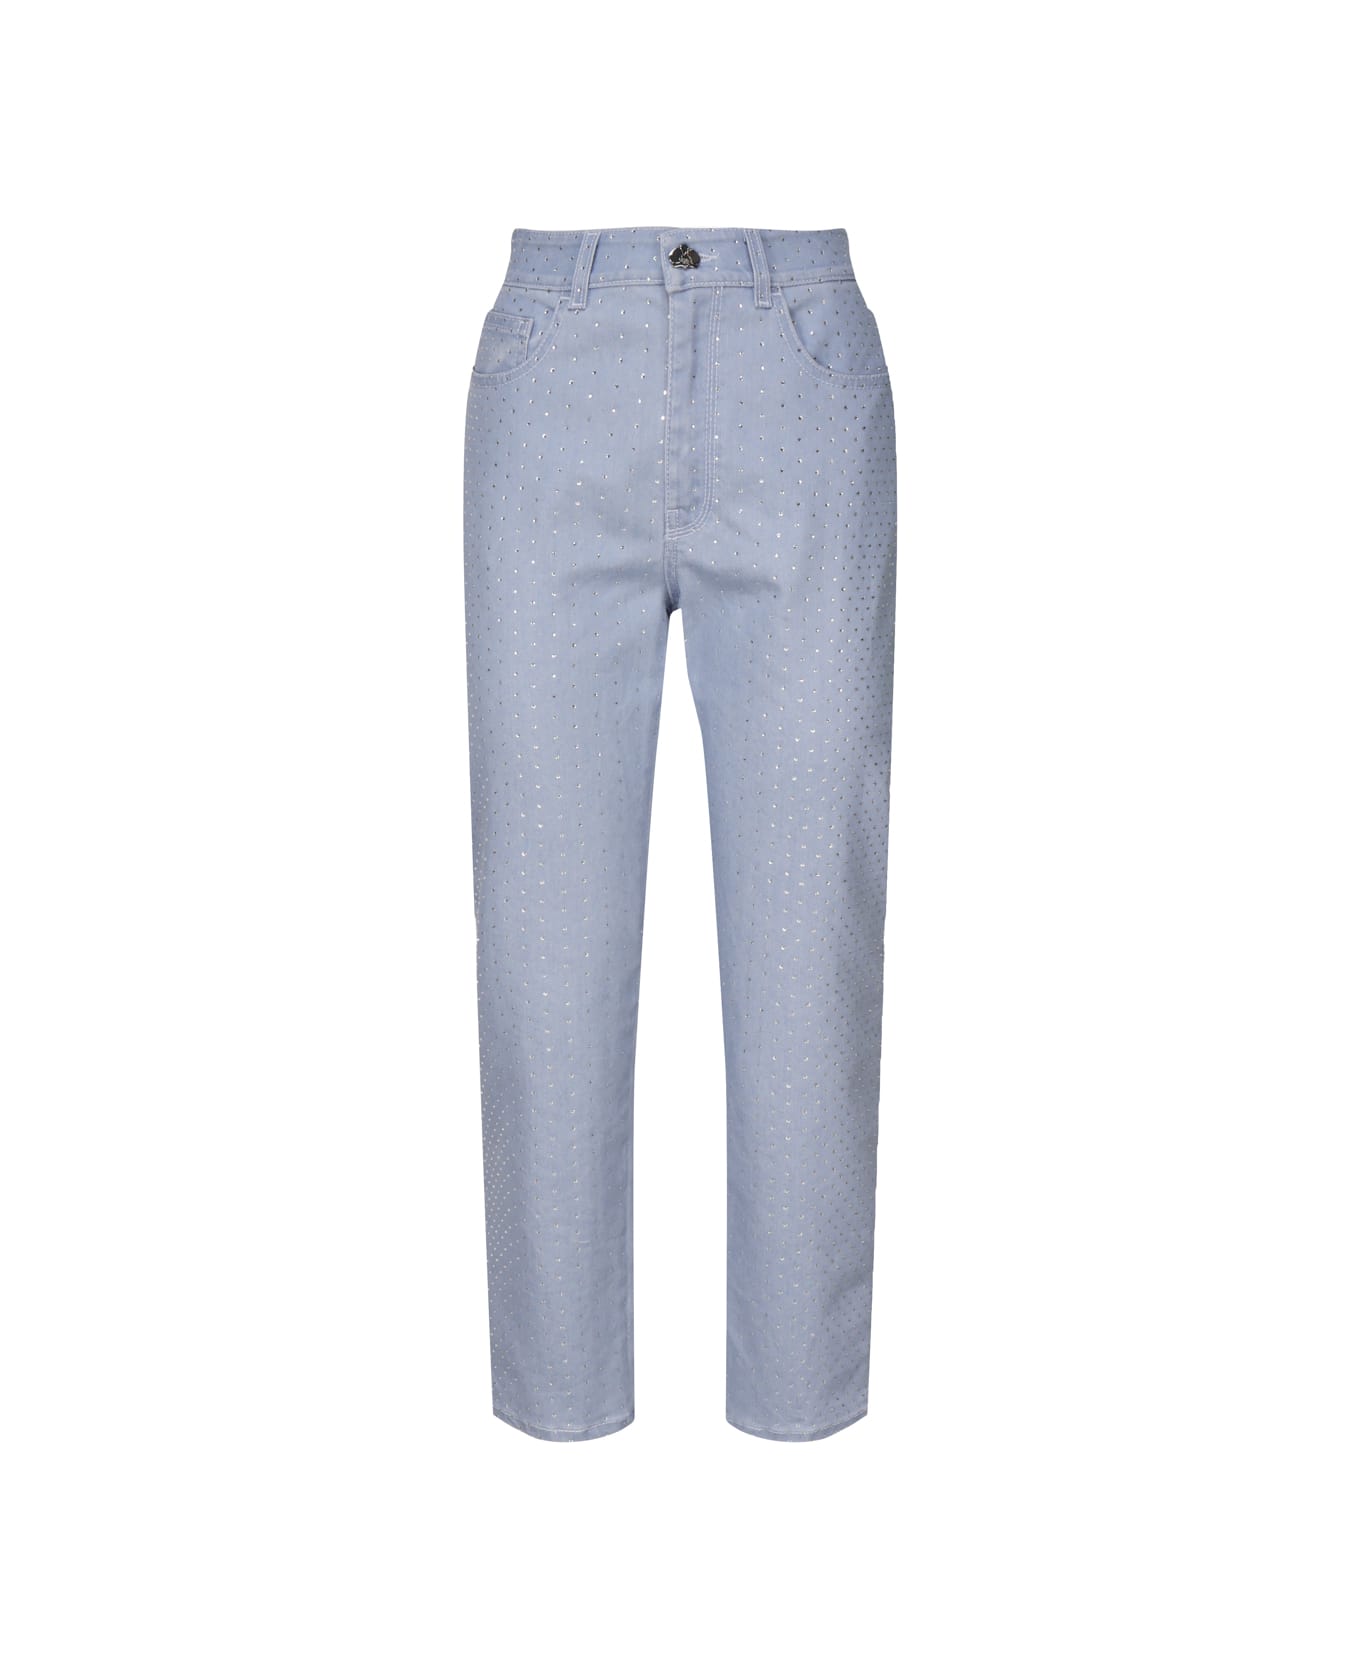 Genny Straight Cut Jeans - Blue